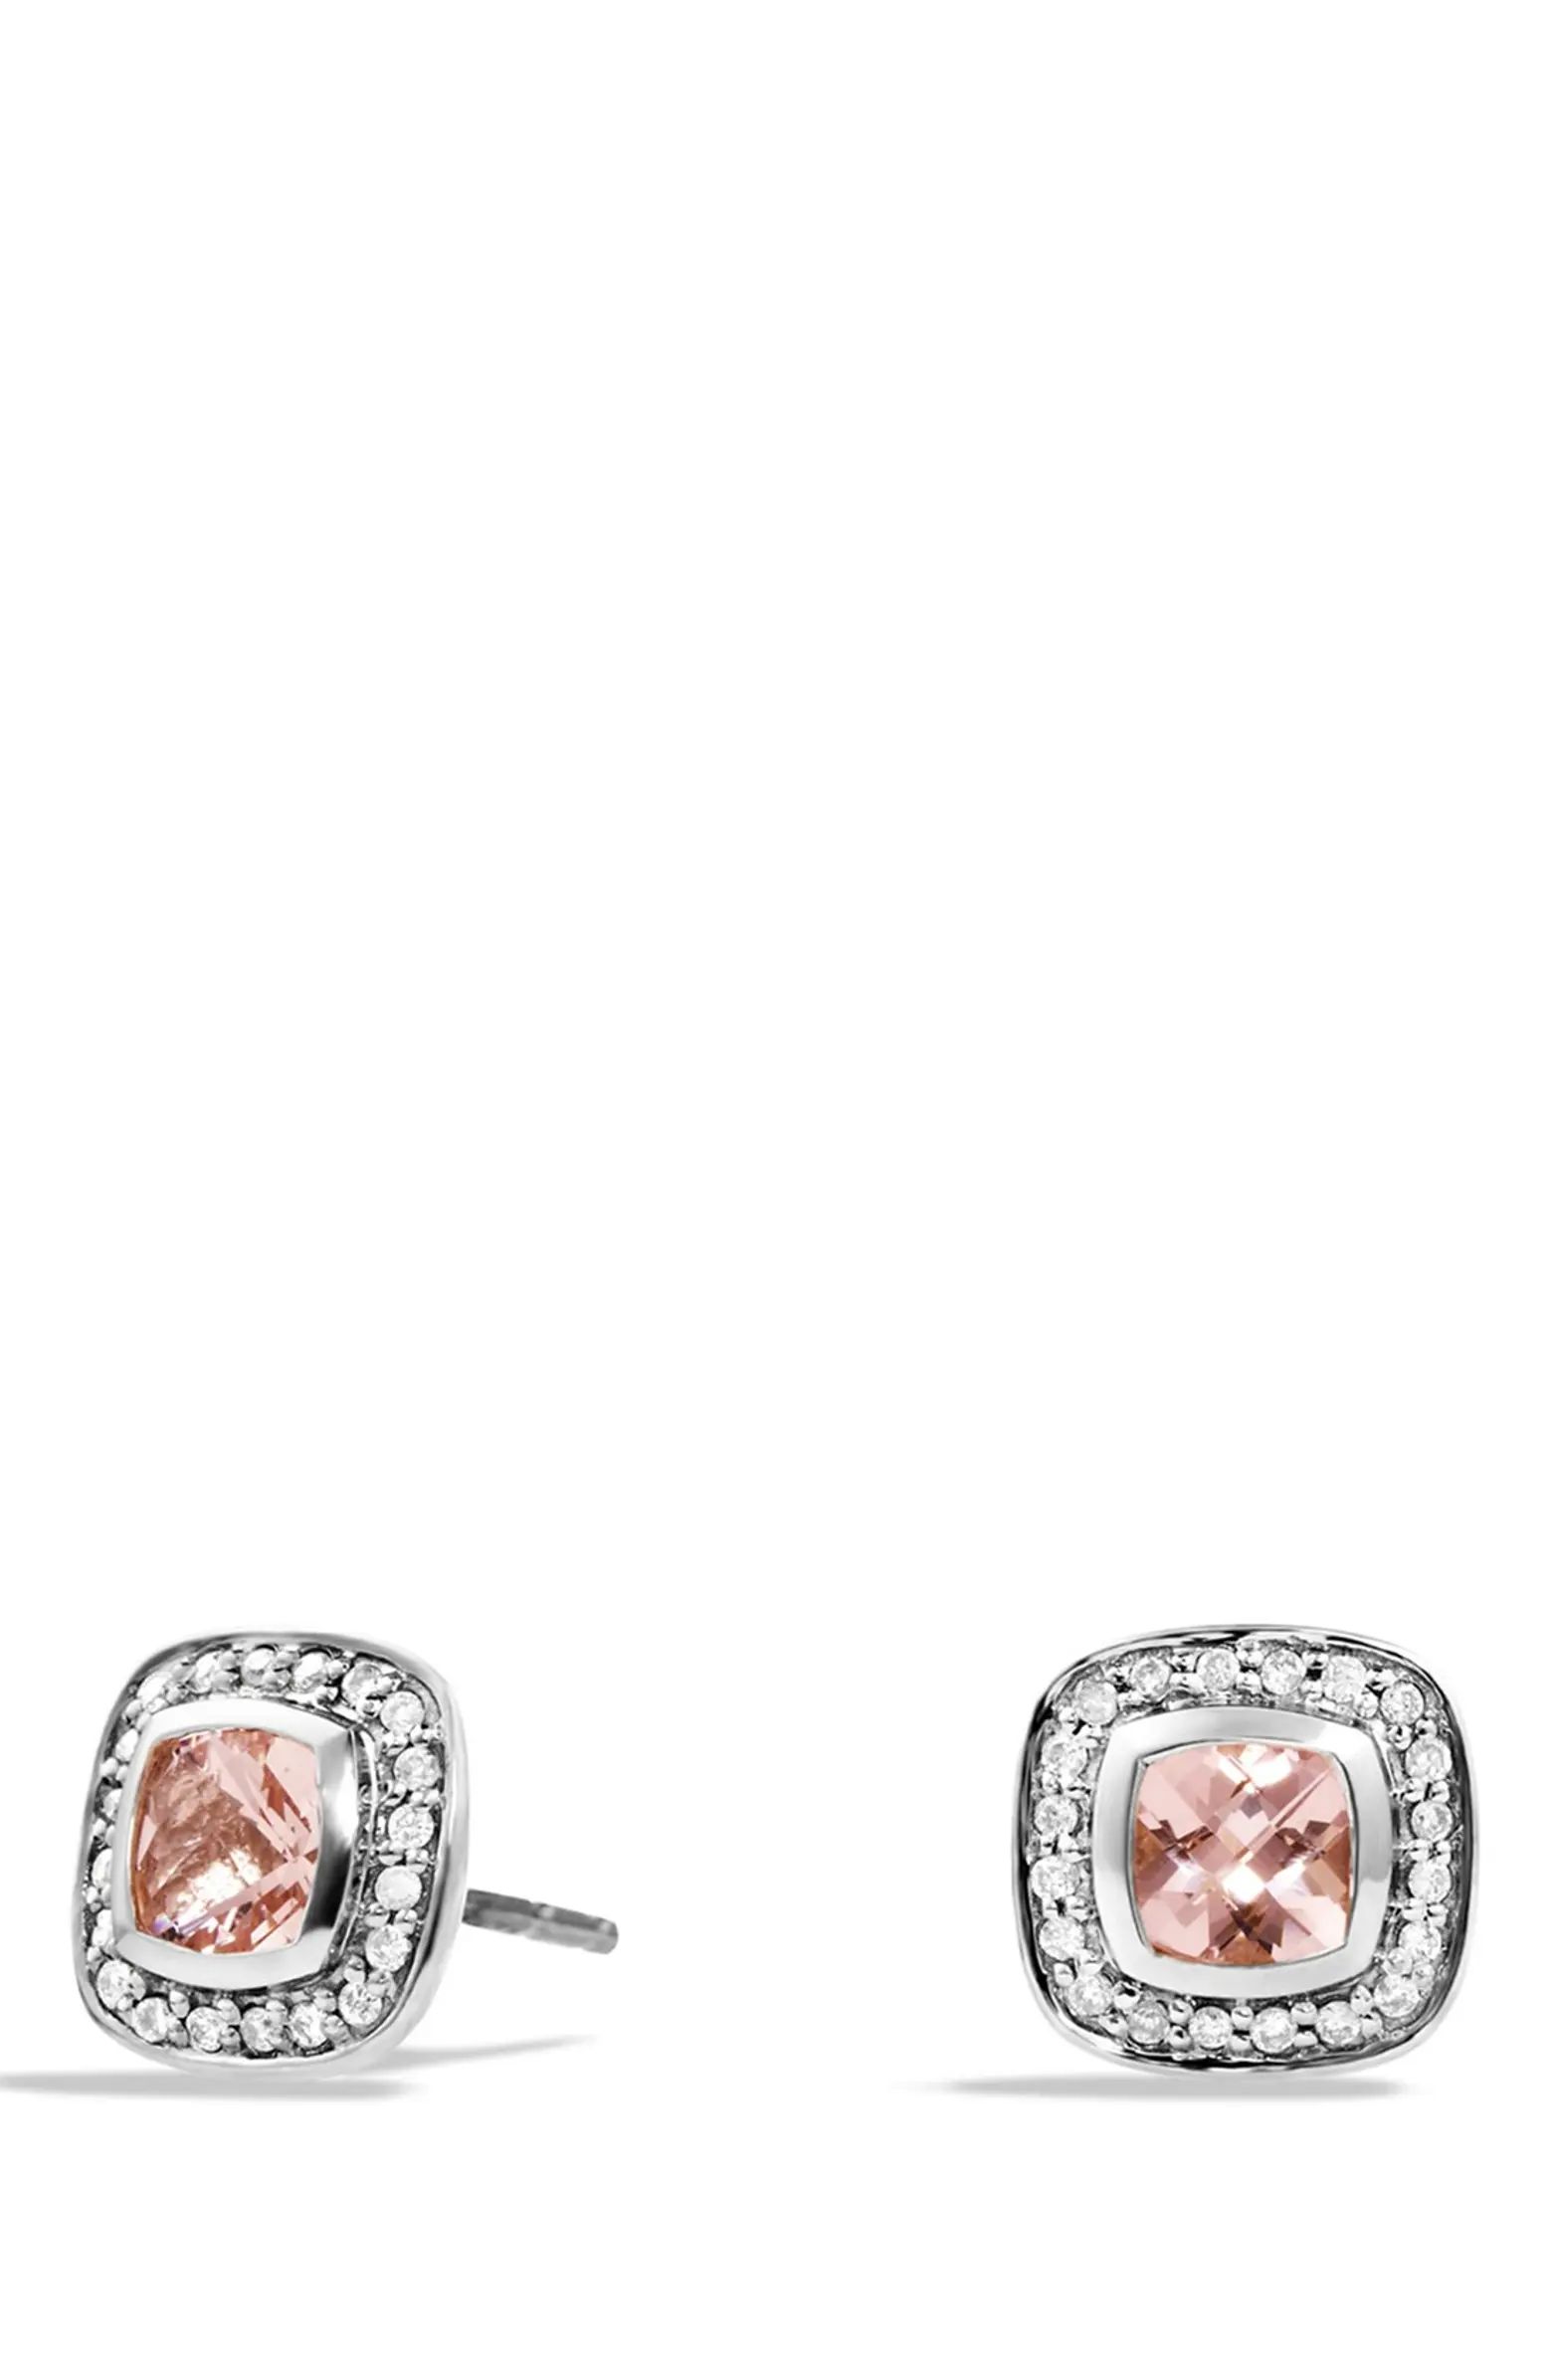 Albion Petite Earrings with Diamonds | Nordstrom